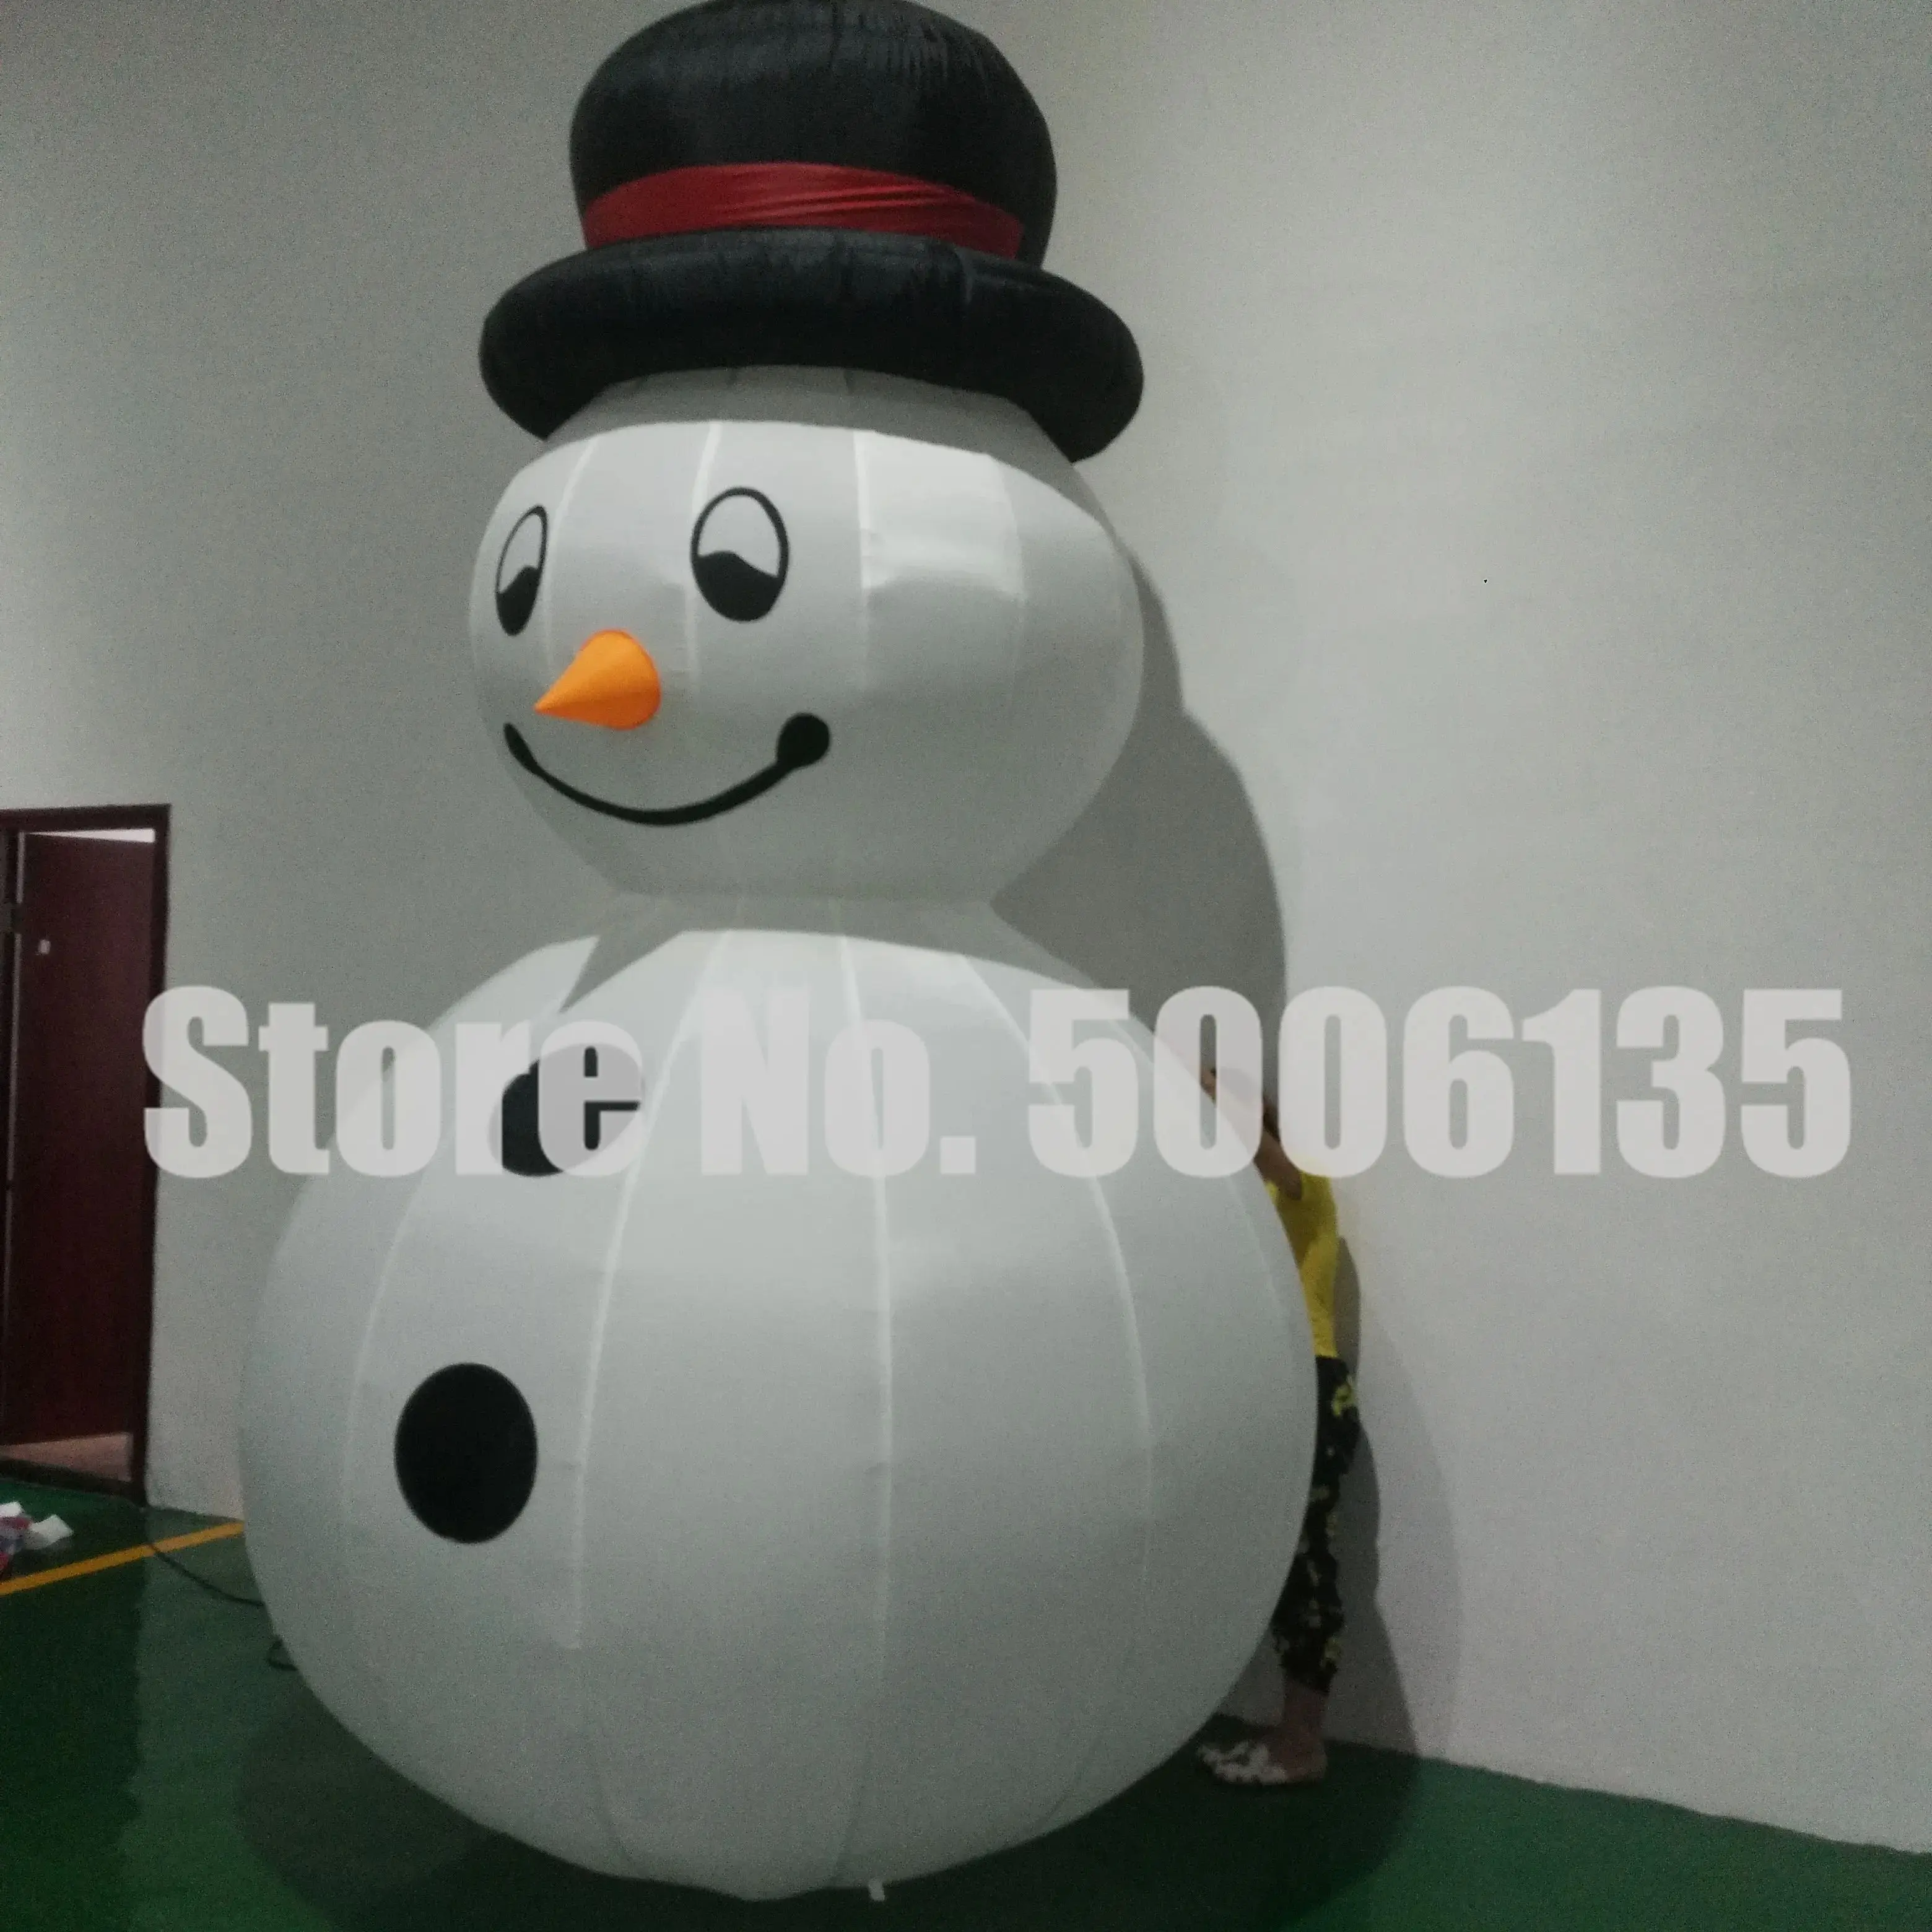 

Christmas Inflatables Decorations Snowman Giant Decorations Advertising Decor outdoor Party Garden Patio Display Xmas Gift